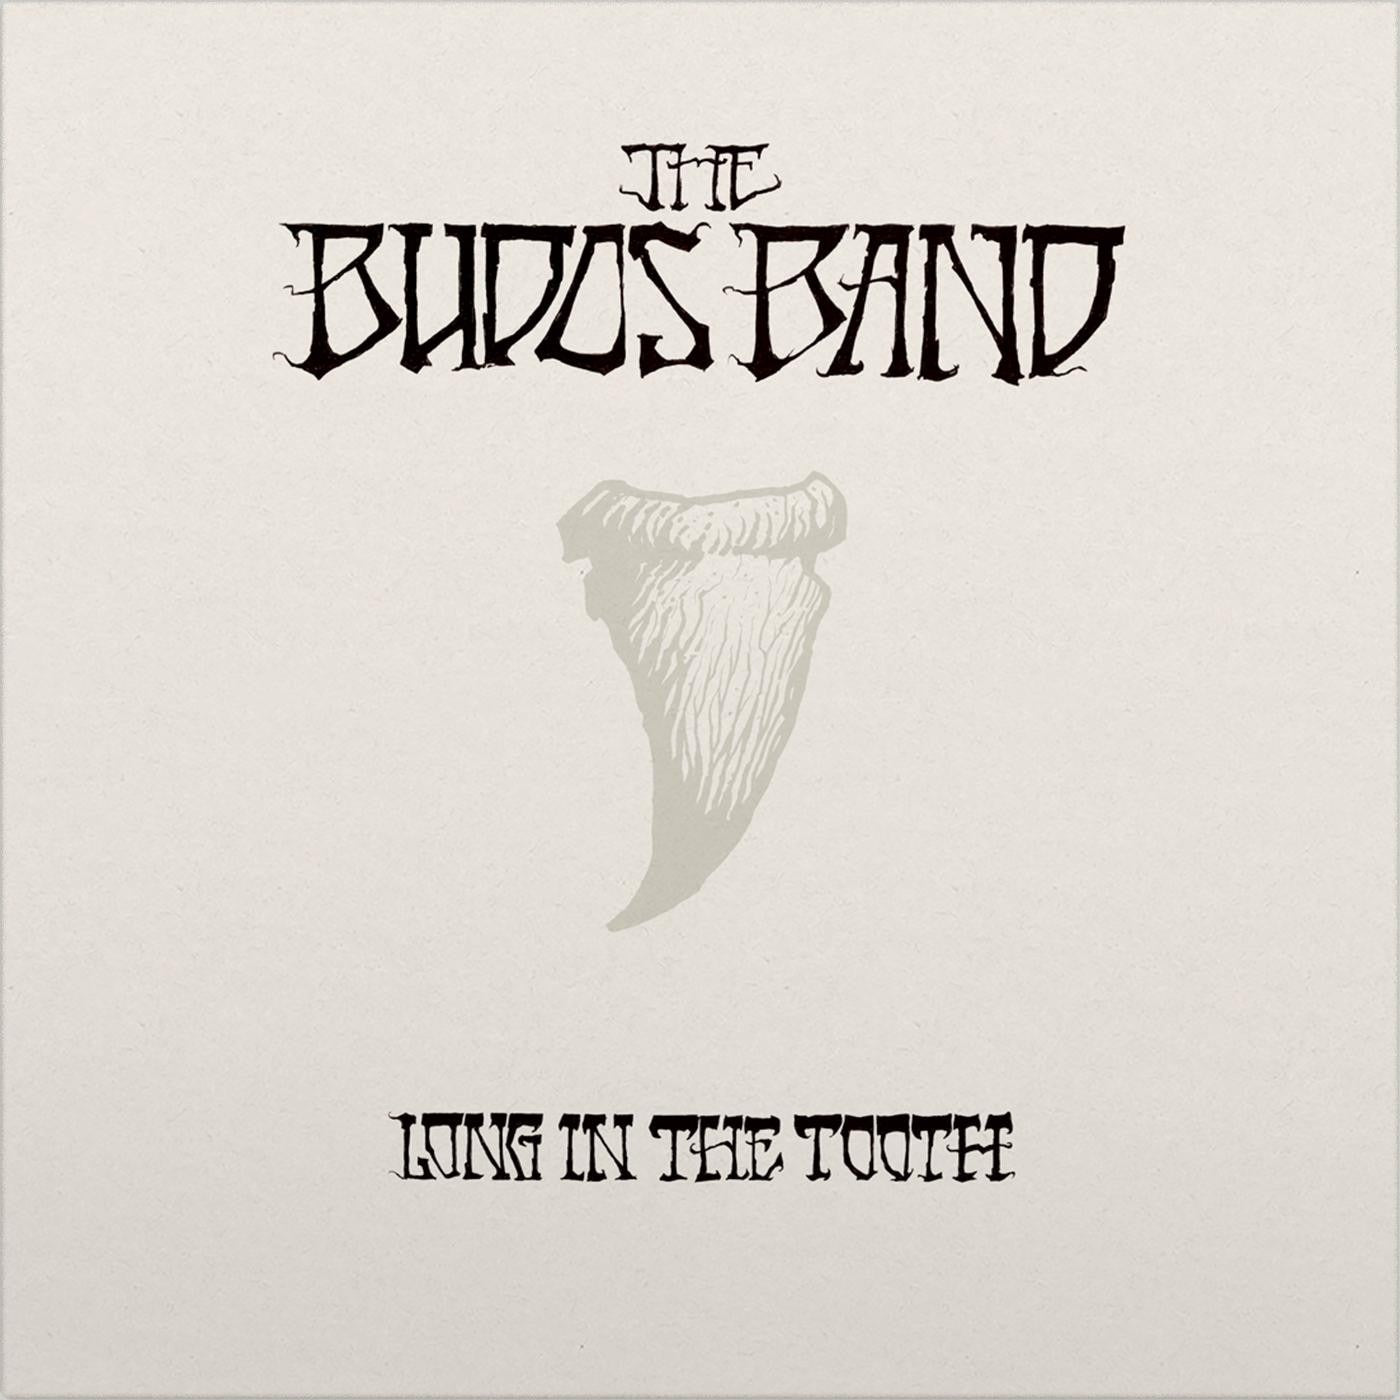 The Budos Band "Long in the Tooth" LP